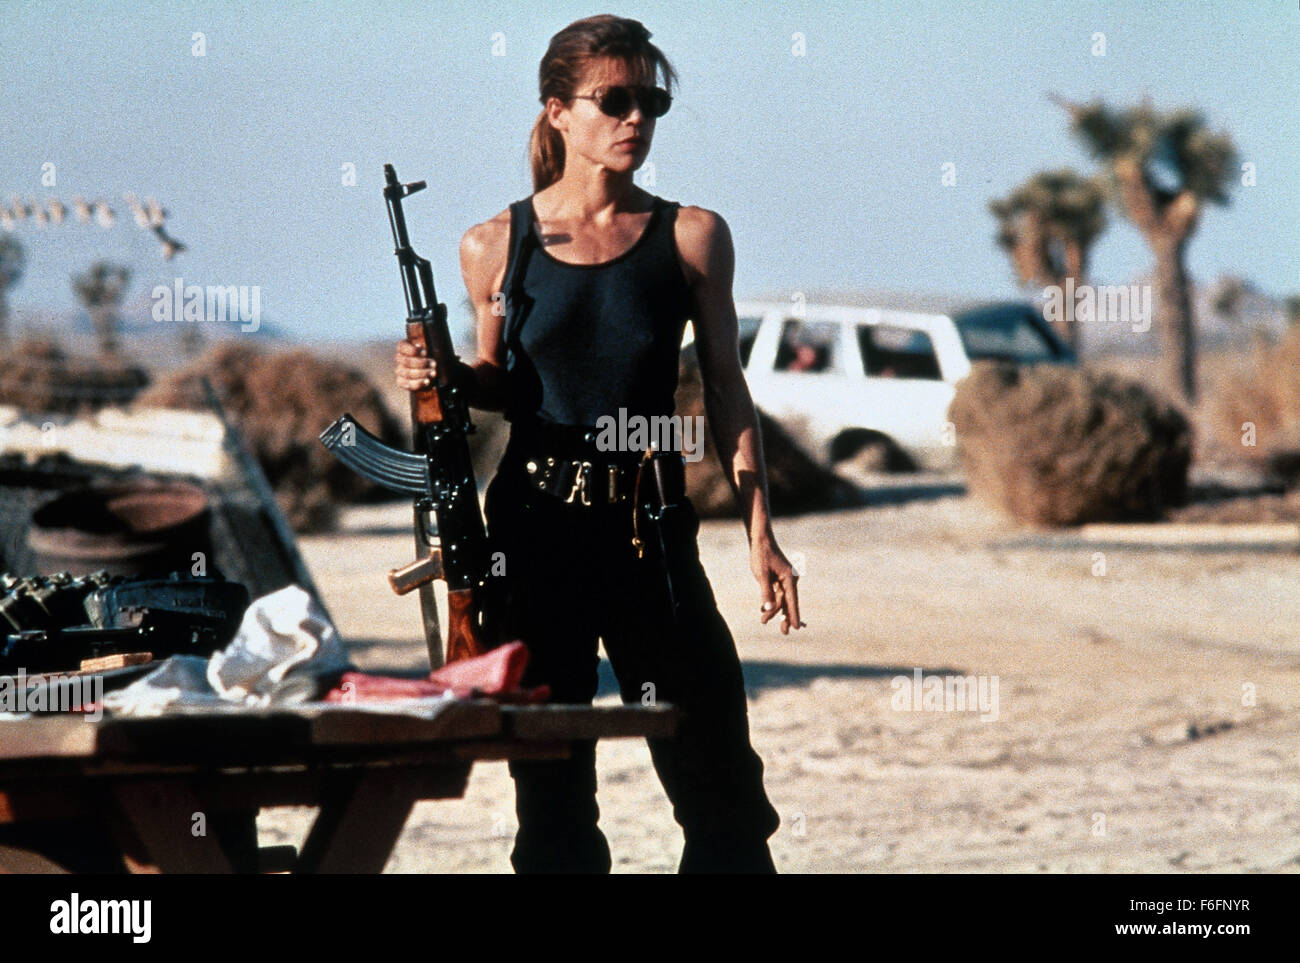 RELEASE DATE: July 3, 1991. MOVIE TITLE: Terminator 2: Judgment Day. STUDIO: TriStar Pictures. PLOT: The cyborg who once tried to kill Sarah Connor must now protect her teenage son, John Connor, from an even more powerful and advanced Terminator. PICTURED: LINDA HAMILTON as Sarah Connor Stock Photo